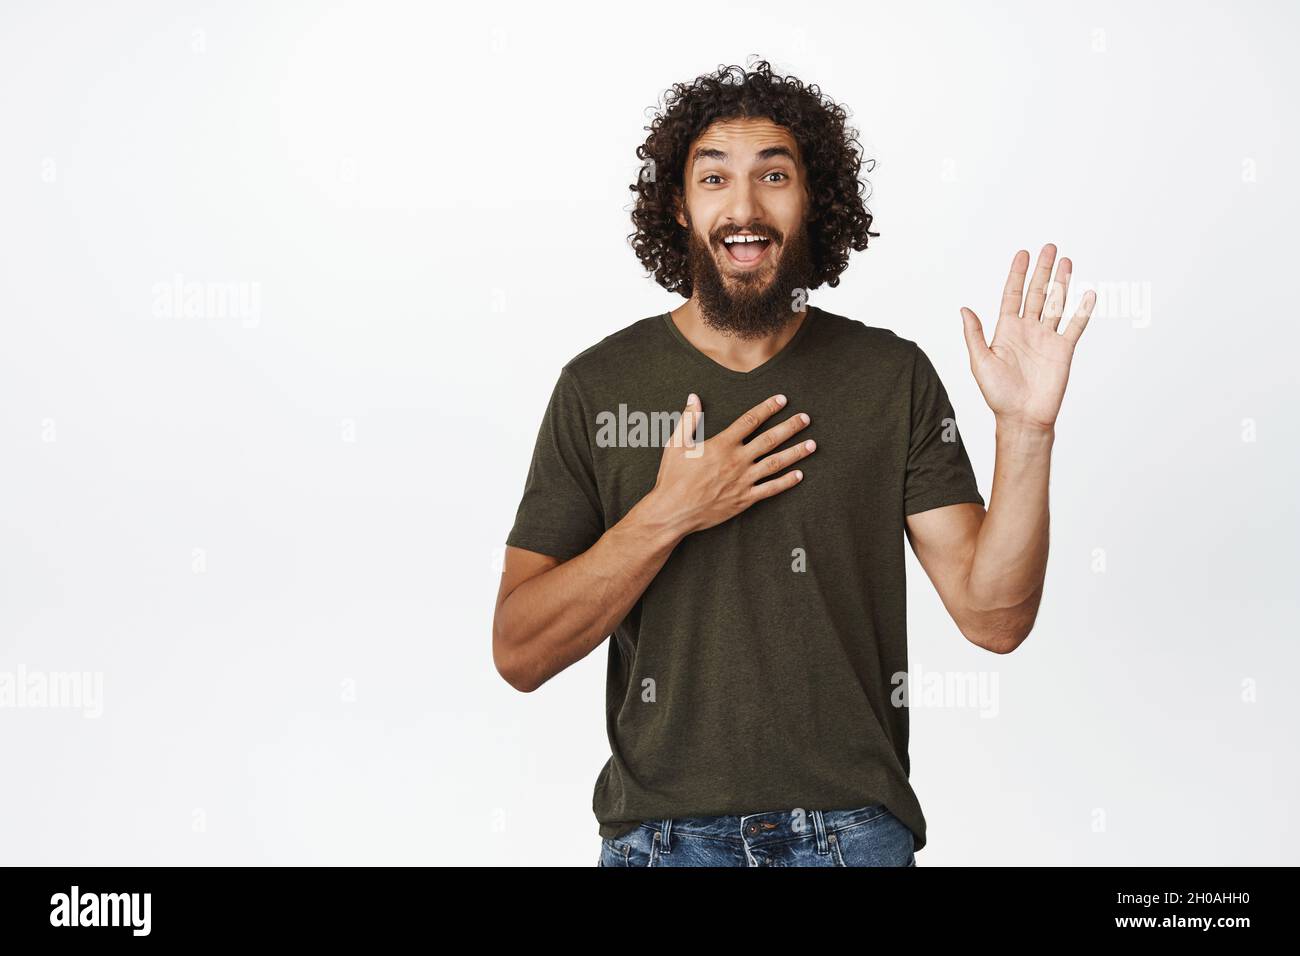 Enthusiastic bearded guy smiling, raising one arm and put hand on heart, introduce himself, waving to greet you, standing over white background Stock Photo